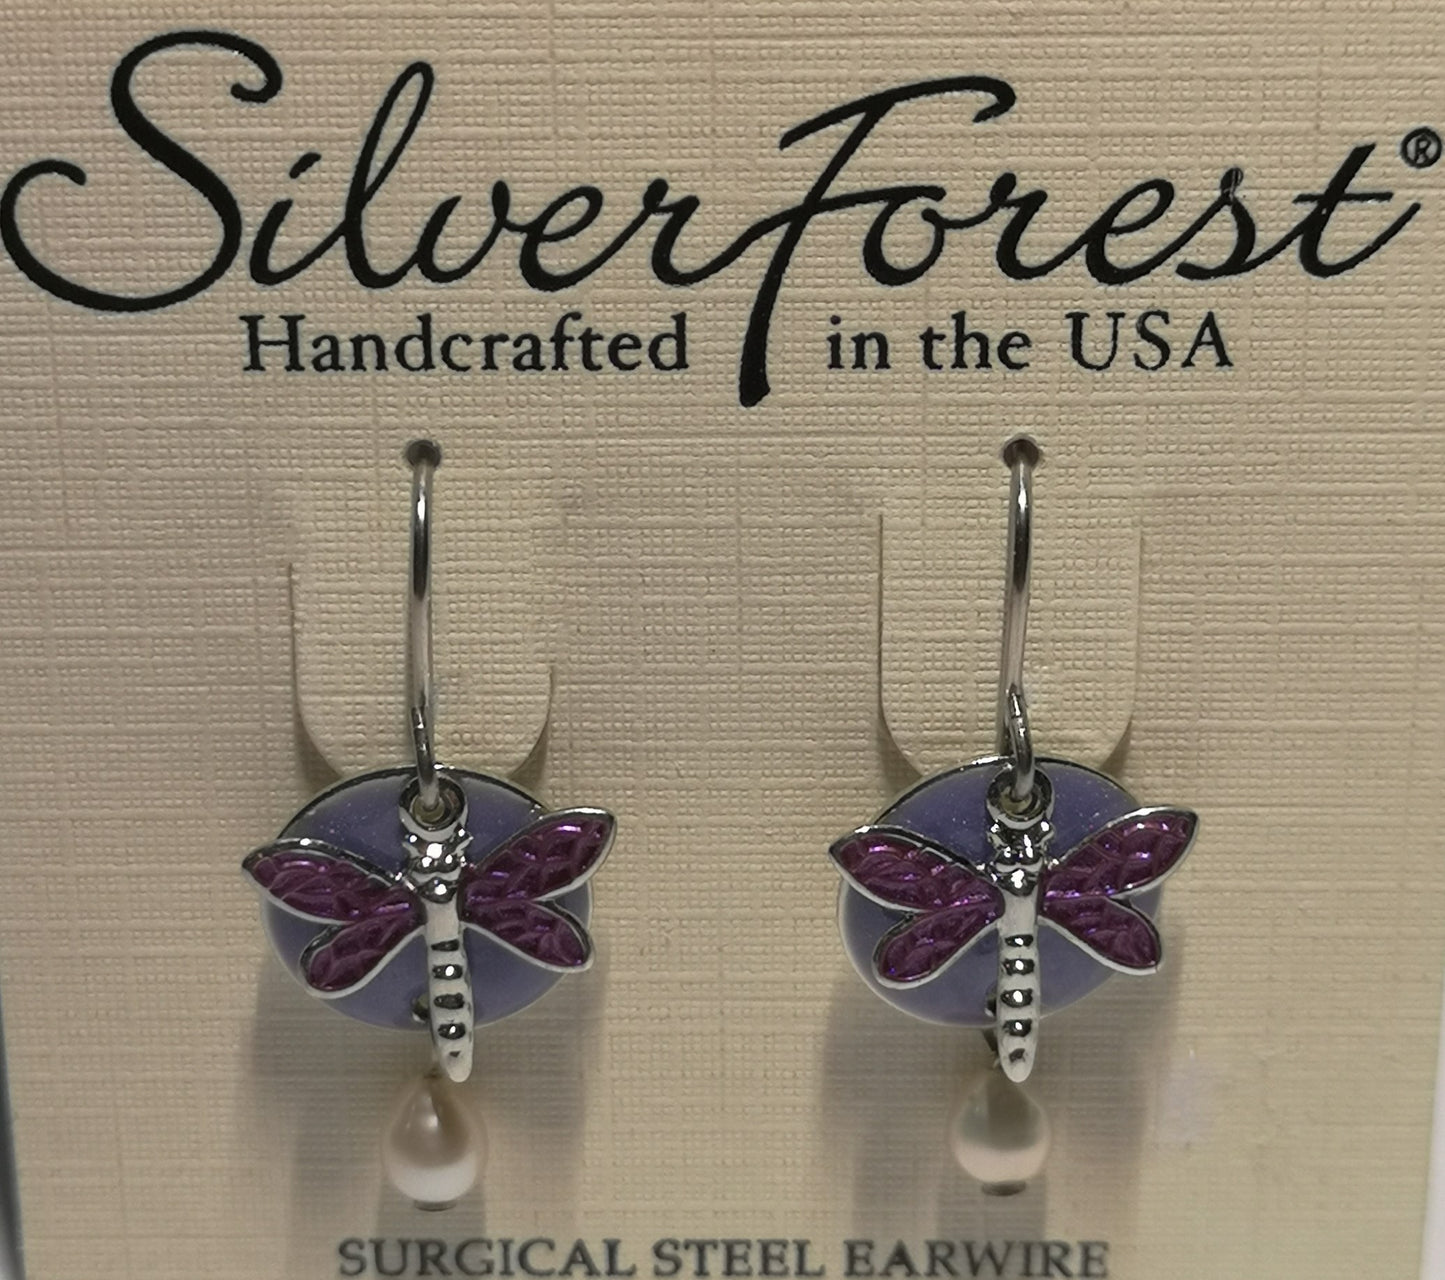 Silver forest surgical steel dangle earrings with purple flat disk and dragonfly and white pearl